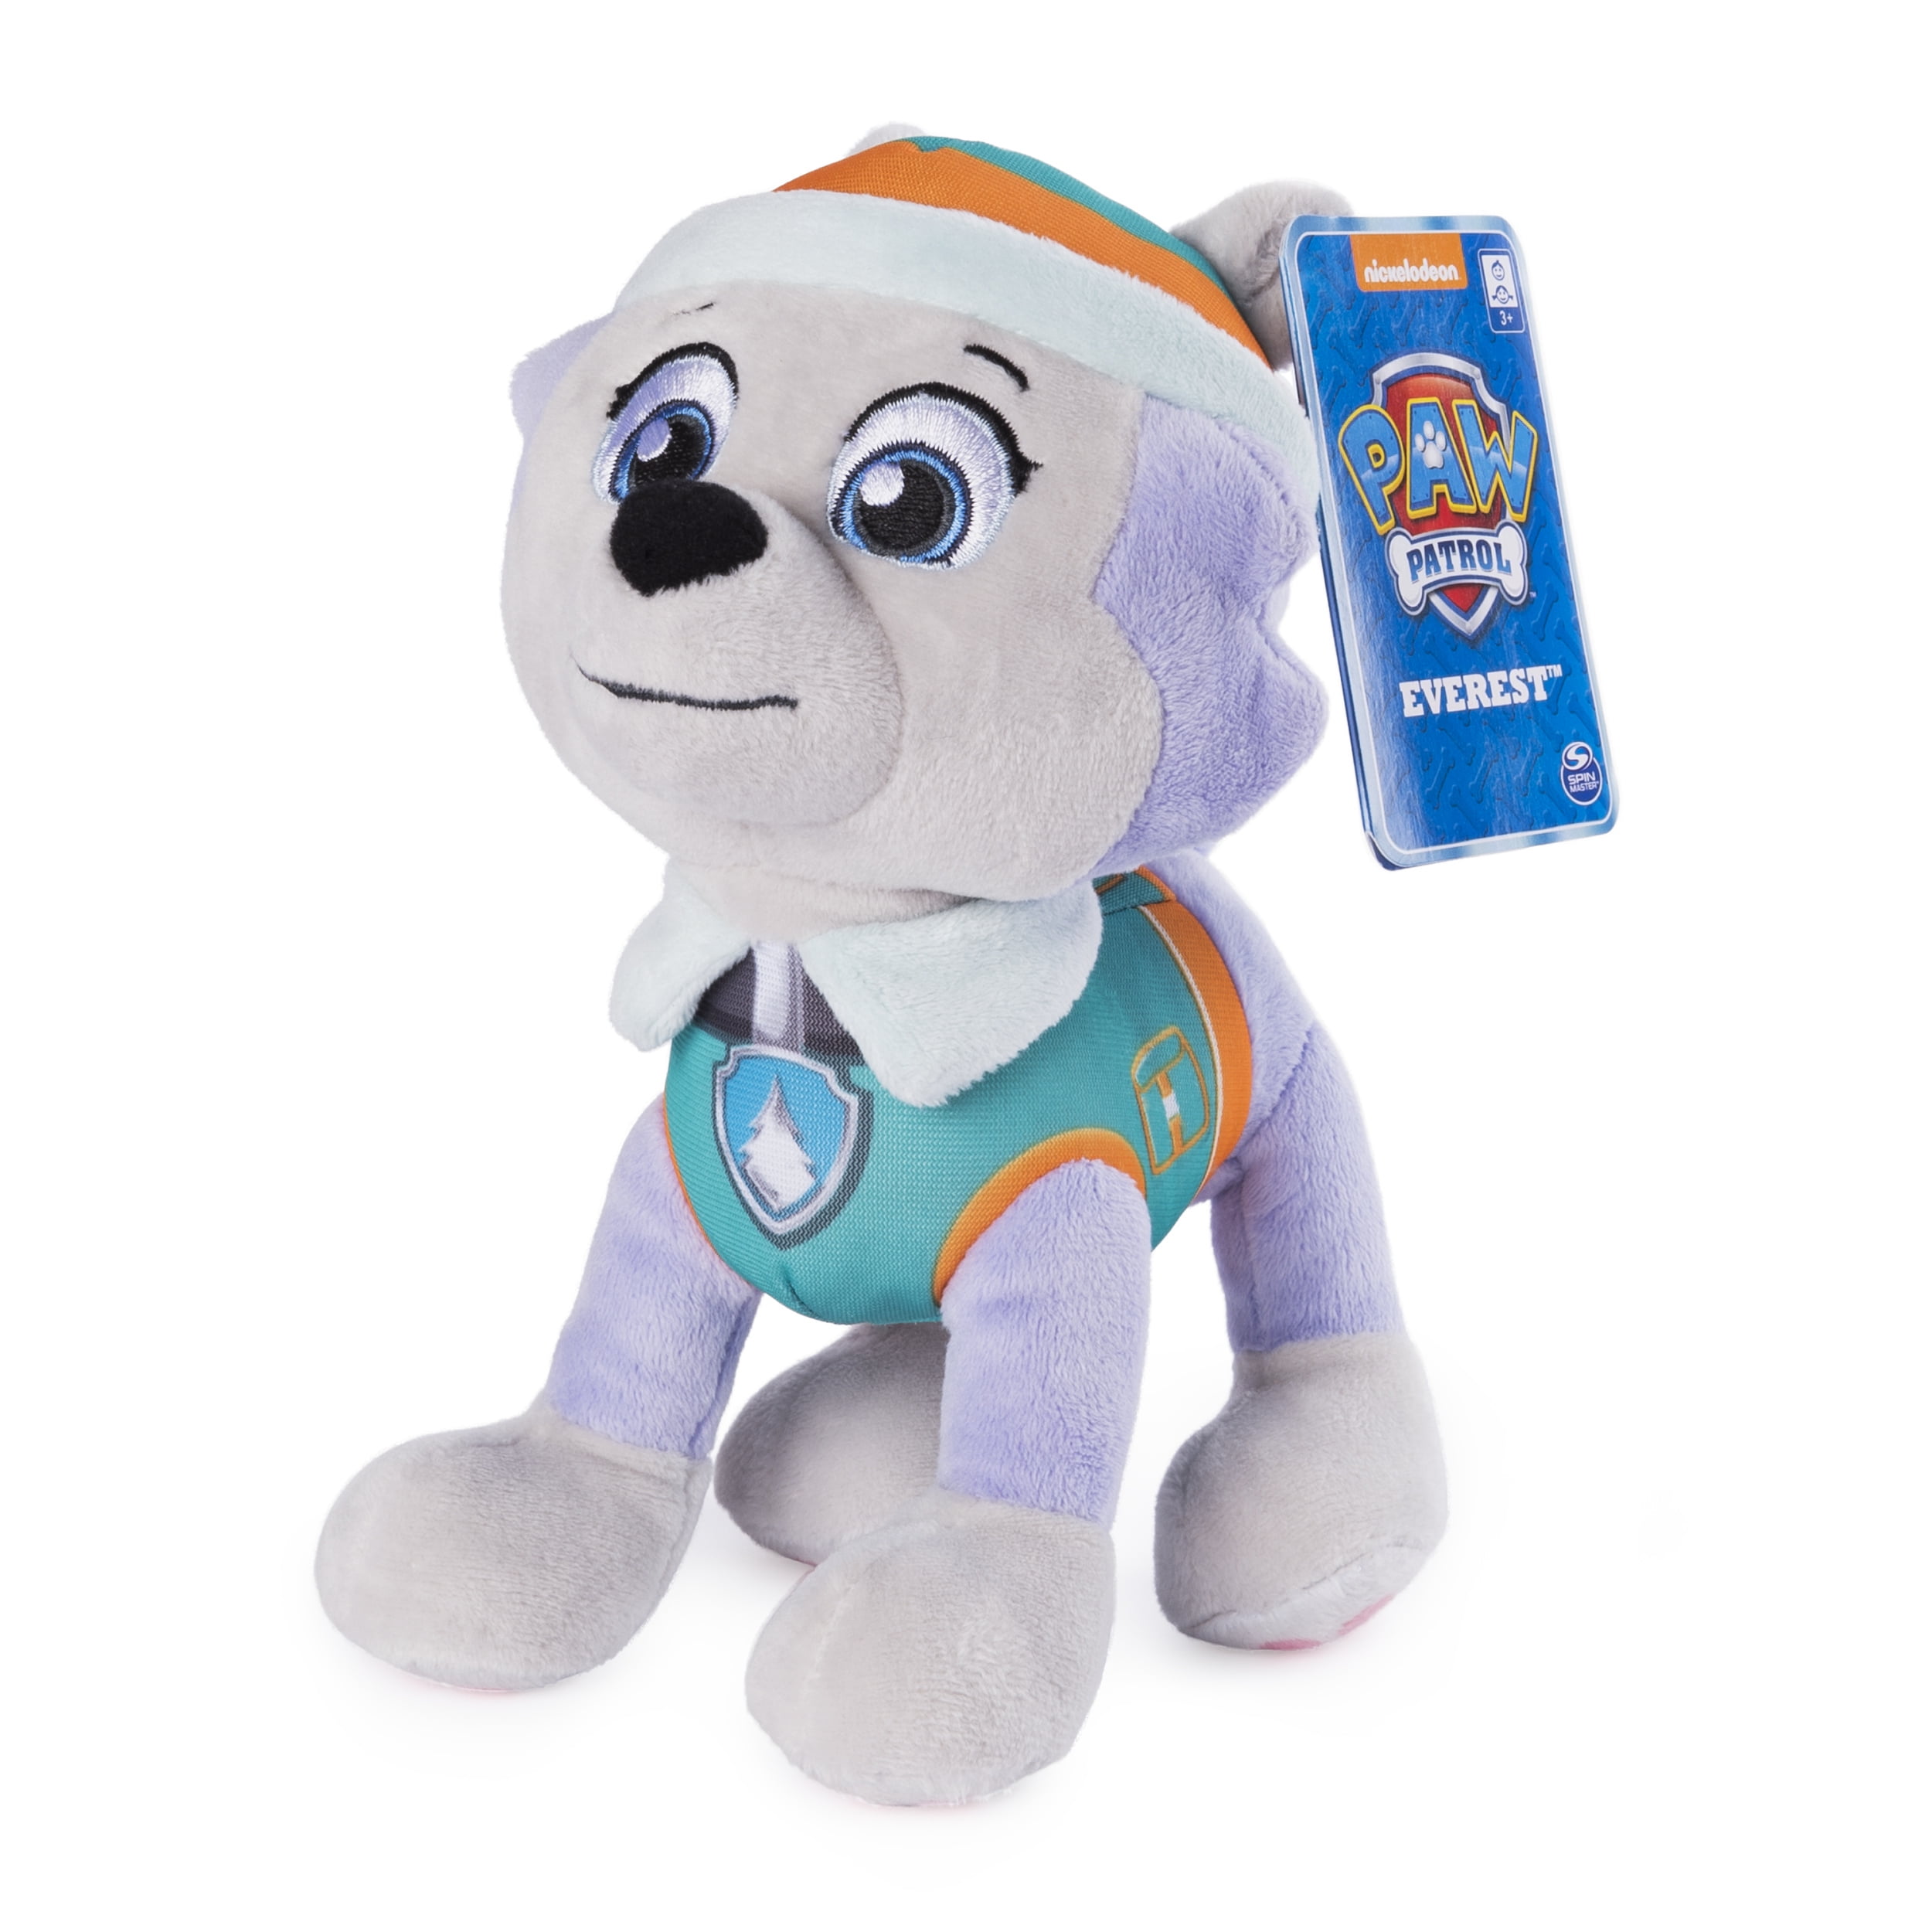 Vie weekend Colonial PAW Patrol, 8 Inch Everest Plush Toy, Standing Plush with Stitched  Detailing, for Ages 3 and up - Walmart.com